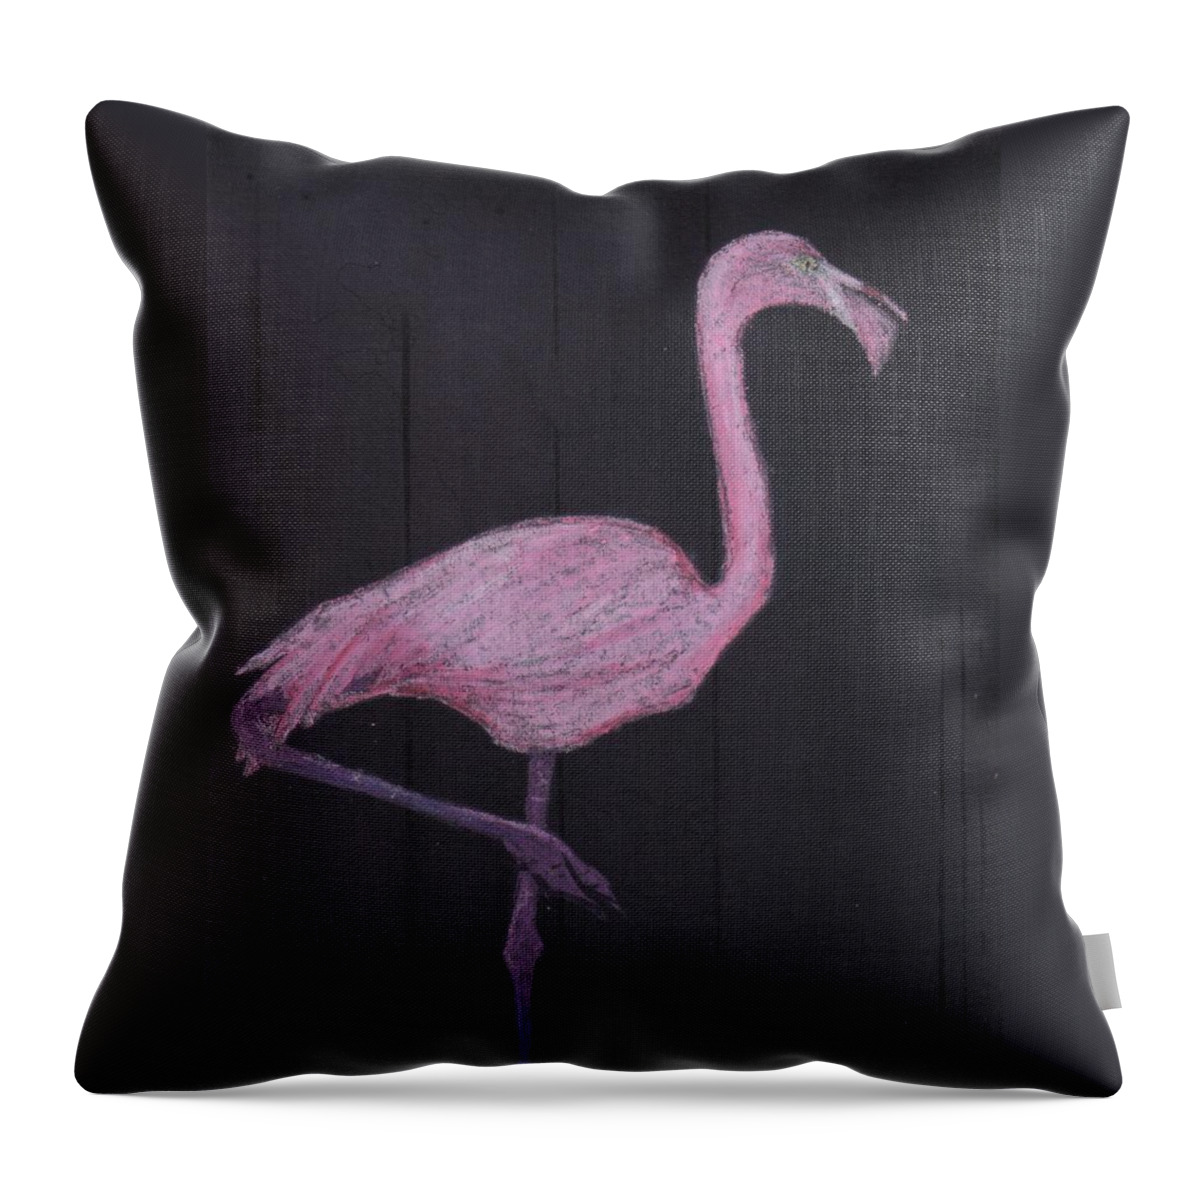 Flamingo Throw Pillow featuring the digital art the Flamingo by George Pedro